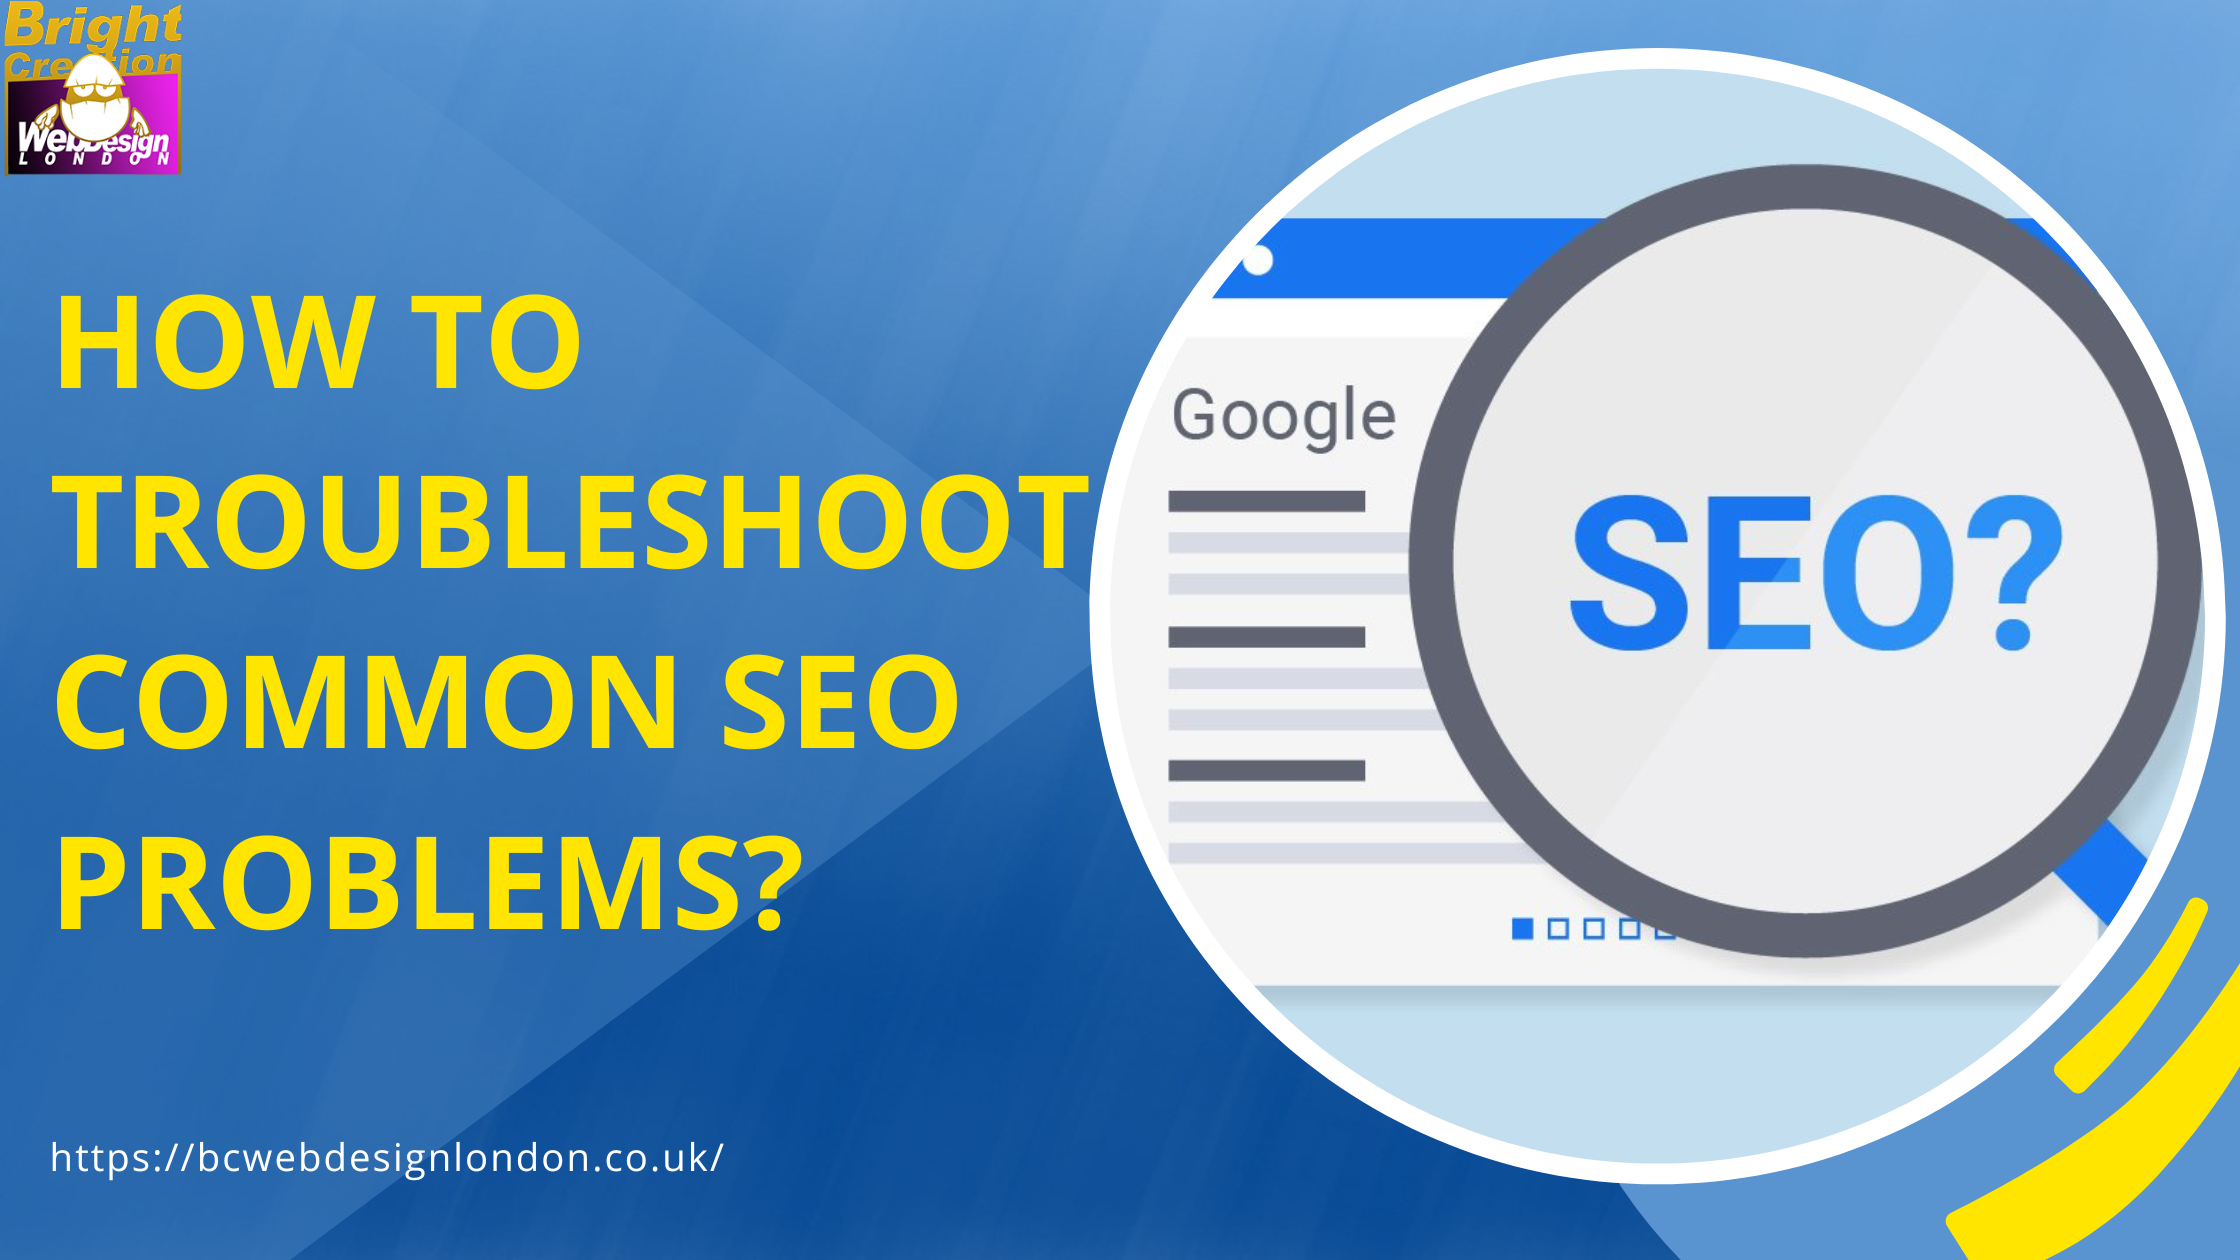 How To Troubleshoot Common SEO Problems?